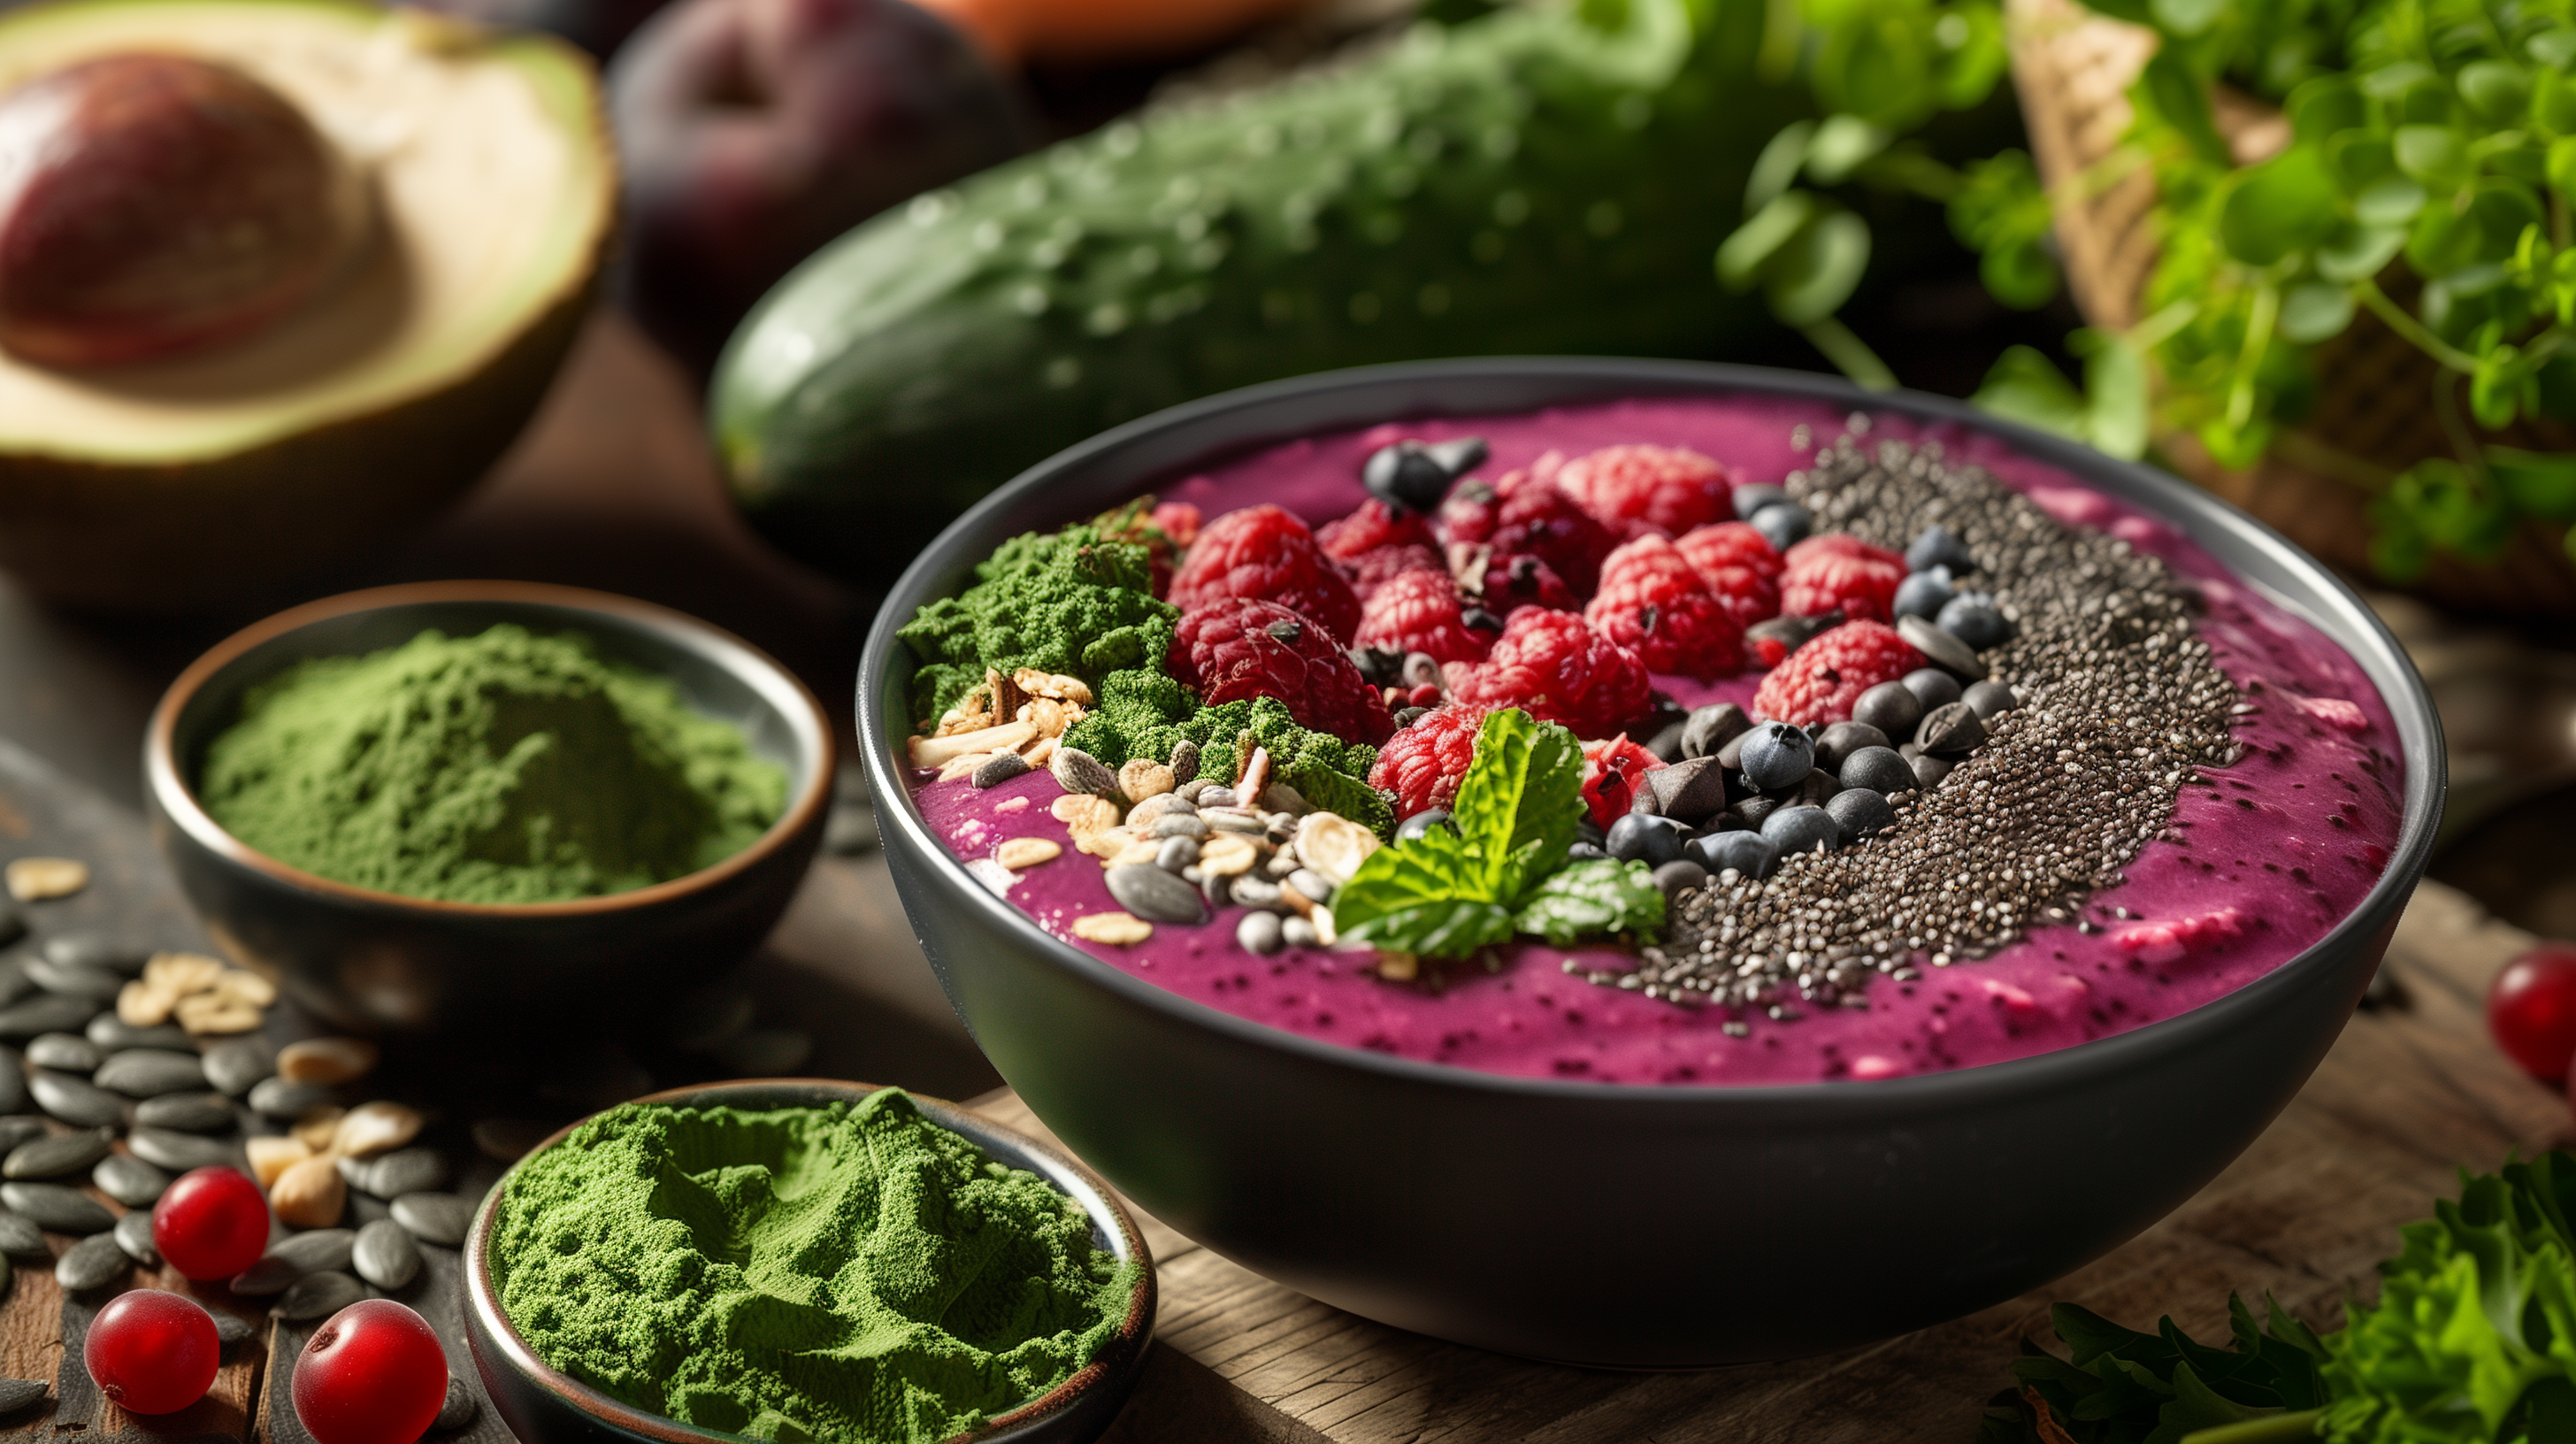 smoothie bowl, rich in color, topped with seeds and nuts, with a scoop of vibrant green superfood